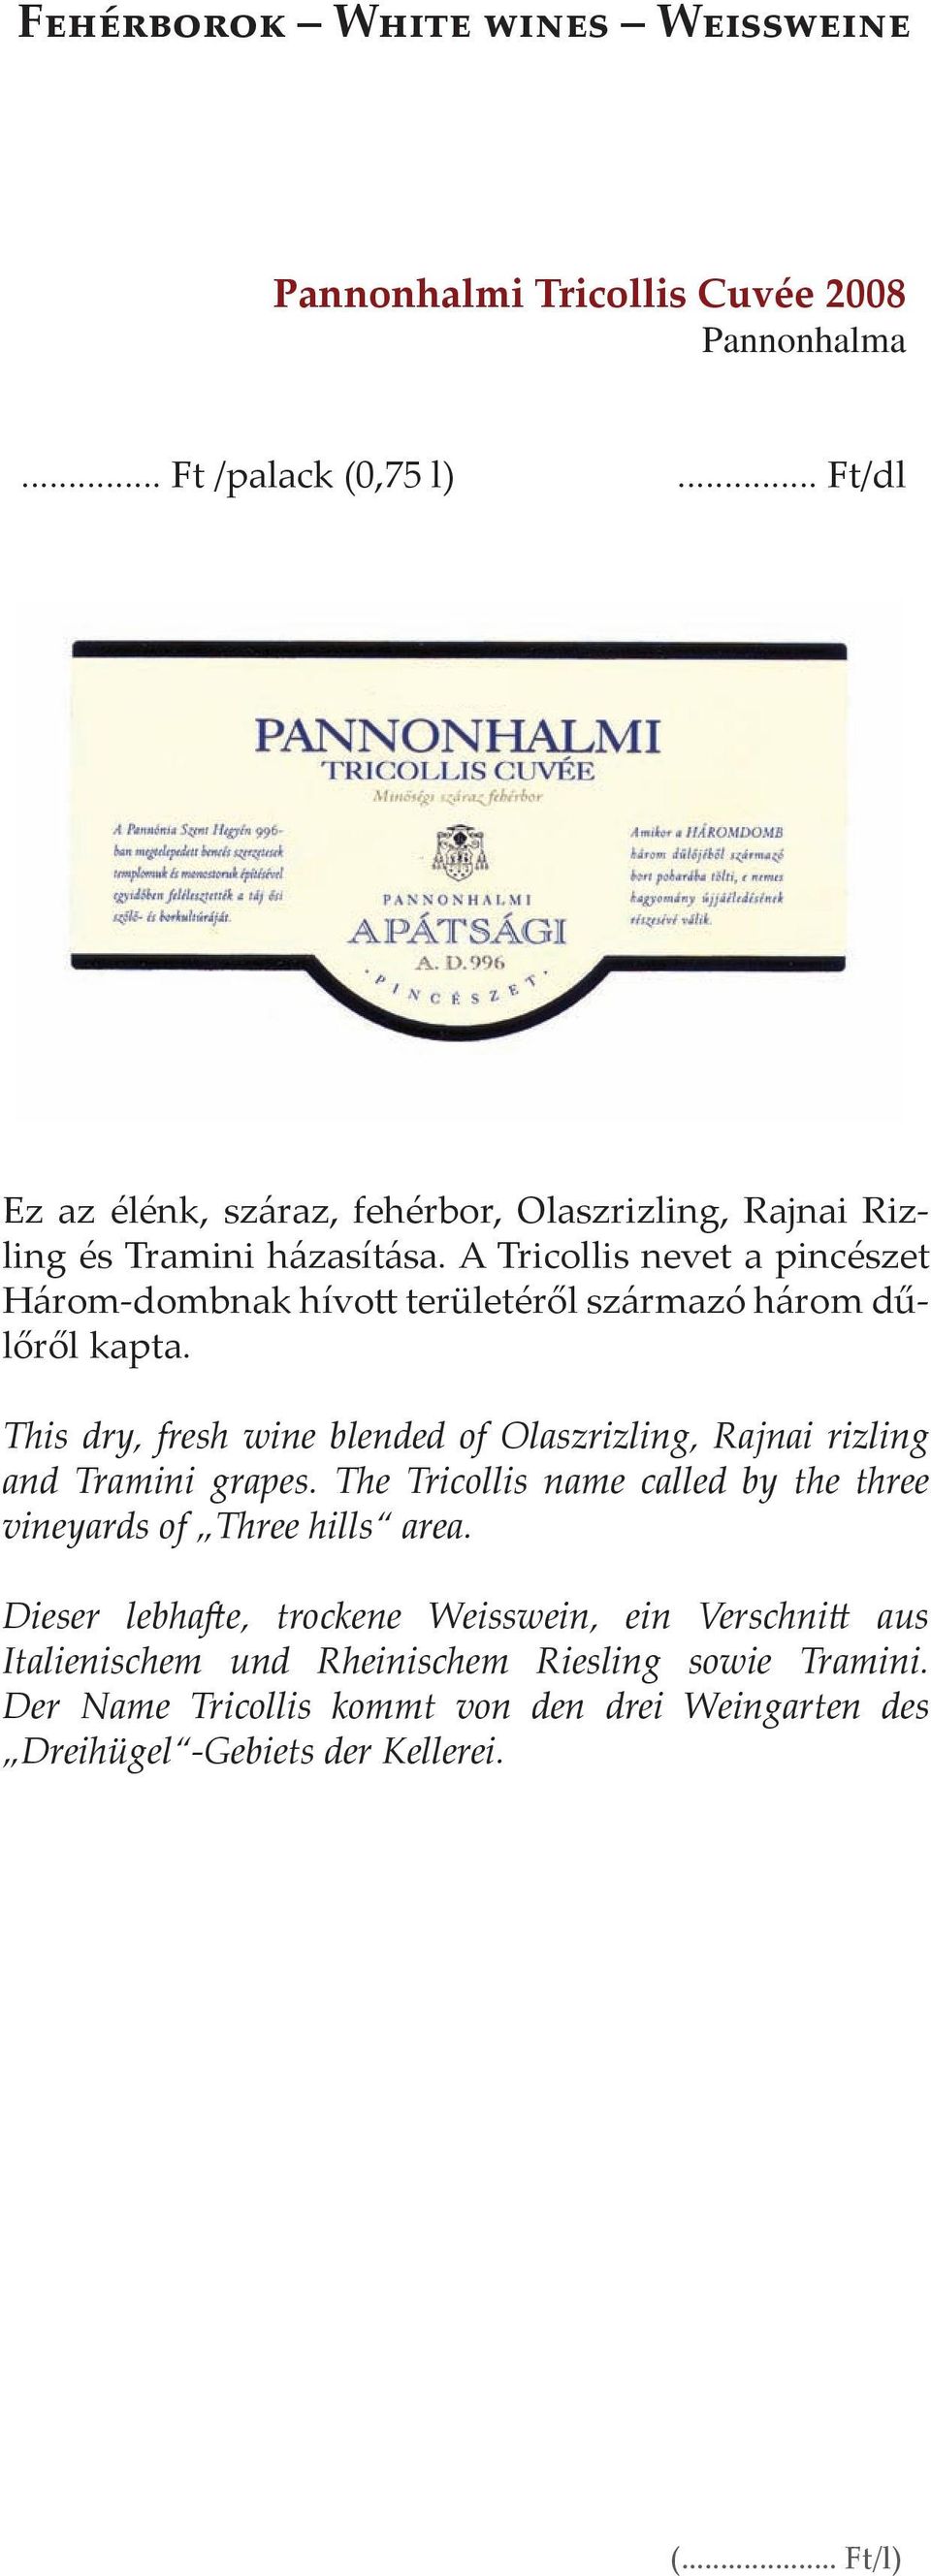 This dry, fresh wine blended of Olaszrizling, Rajnai rizling and Tramini grapes. The Tricollis name called by the three vineyards of Three hills area.